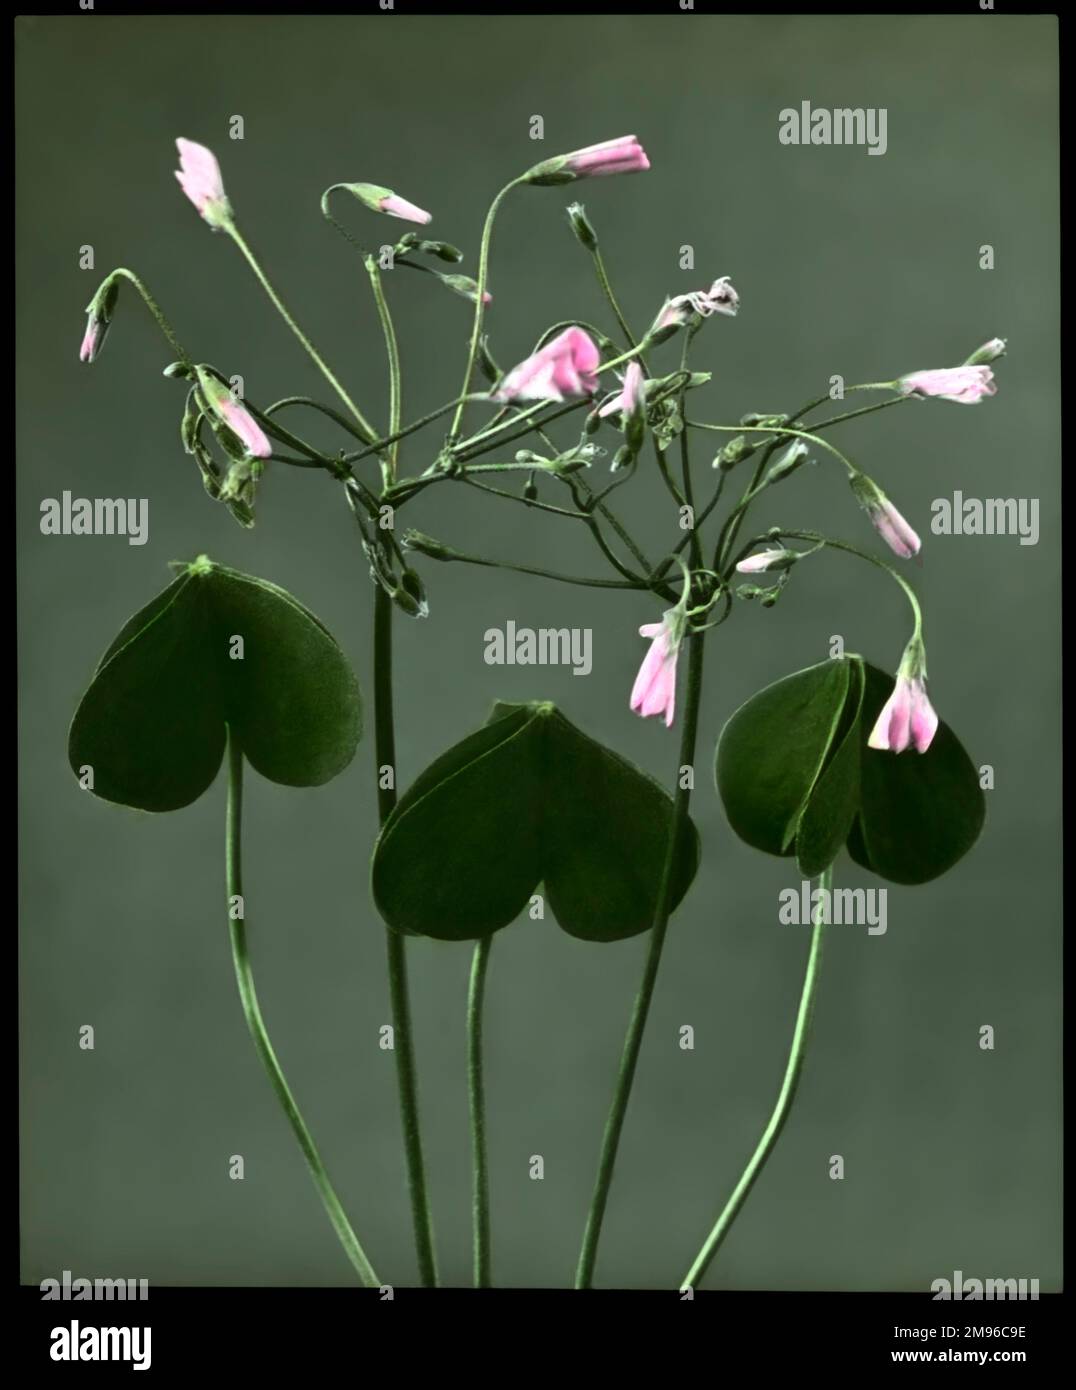 Oxalis Crassipes Rosea (Strawberry Oxalis, Wood Sorrel), a perennial flowering plant of the Oxalidaceae family, with rose-pink flowers.  Seen here at night, with the flowers closed. Stock Photo